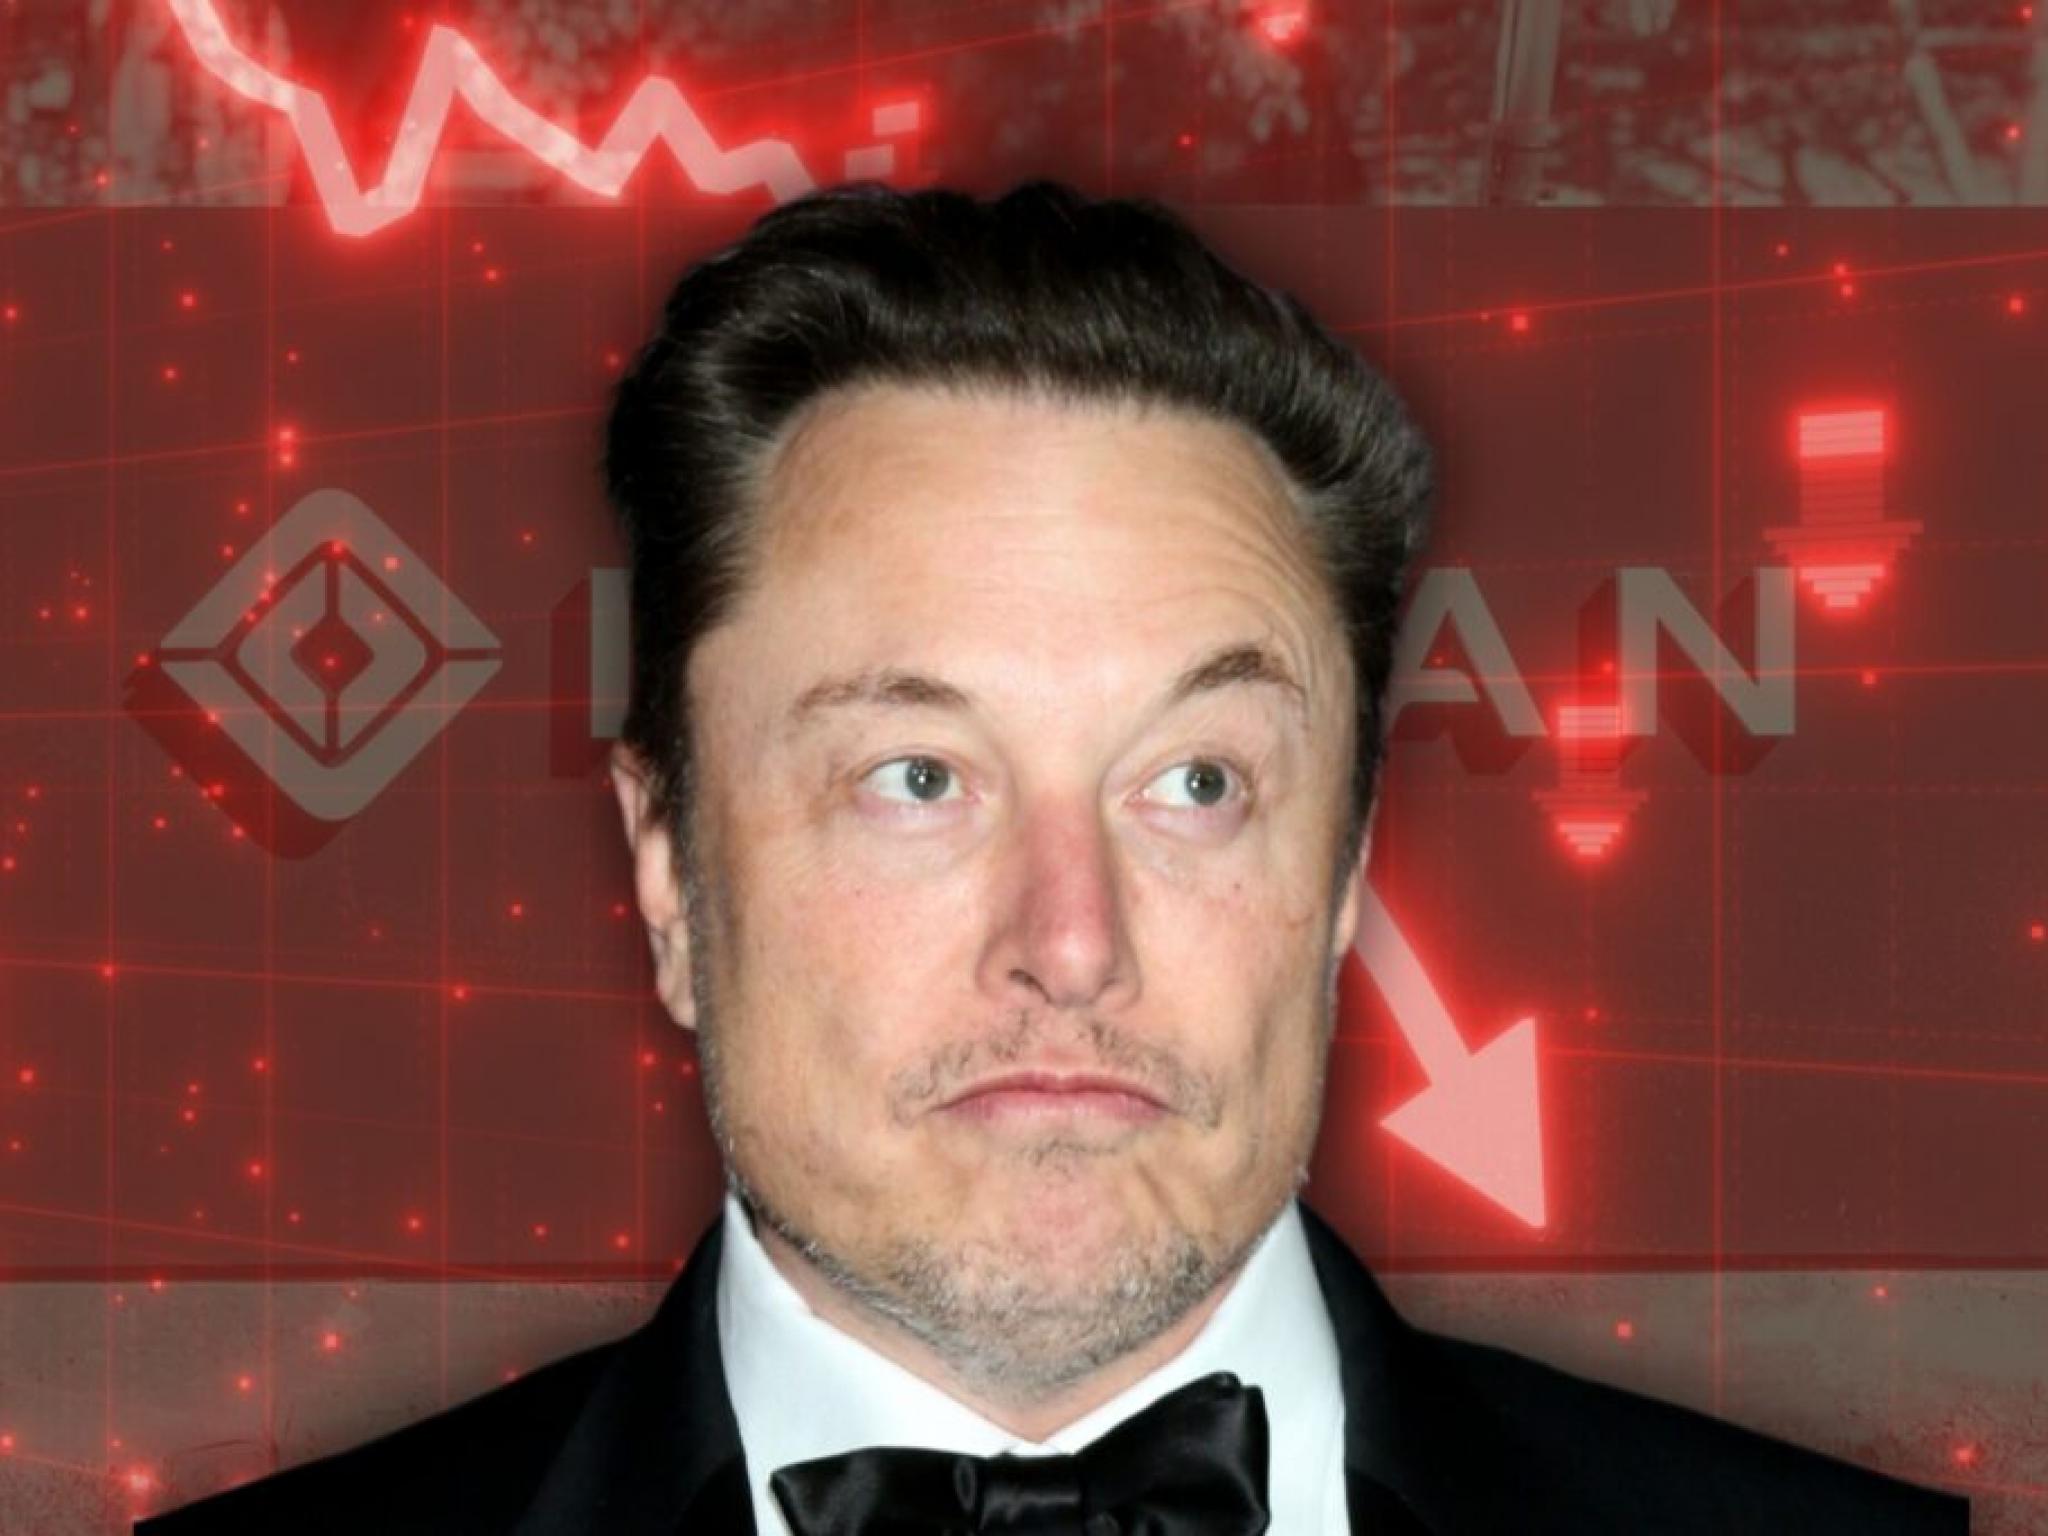  wow-elon-musk-stunned-by-reminder-of-how-tesla-bulls-optimistic-2021-rivian-prediction-didnt-age-well-corrected 